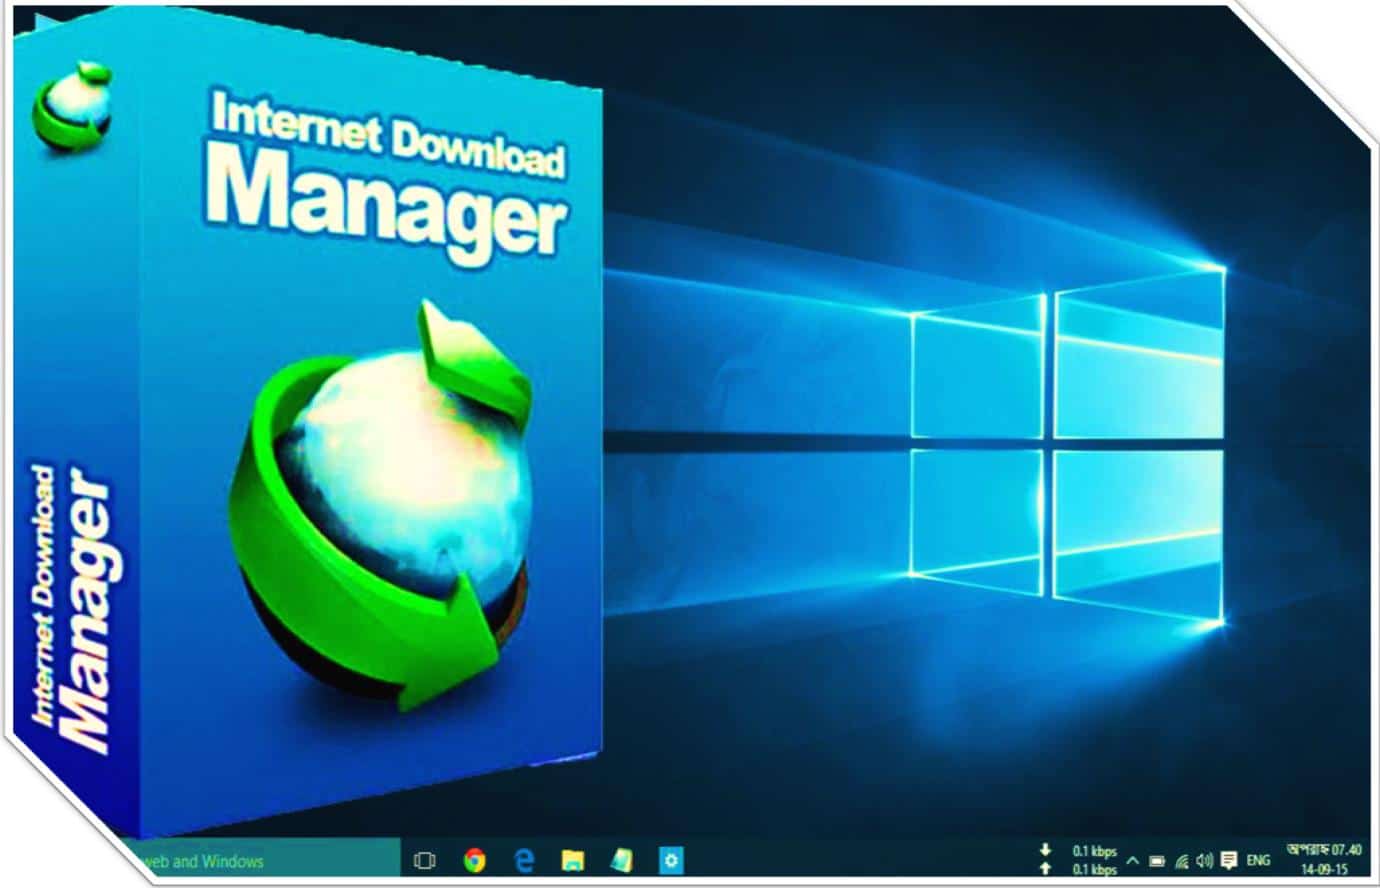 IDM 6.38 Build 14 Full Version with Crack Free Download